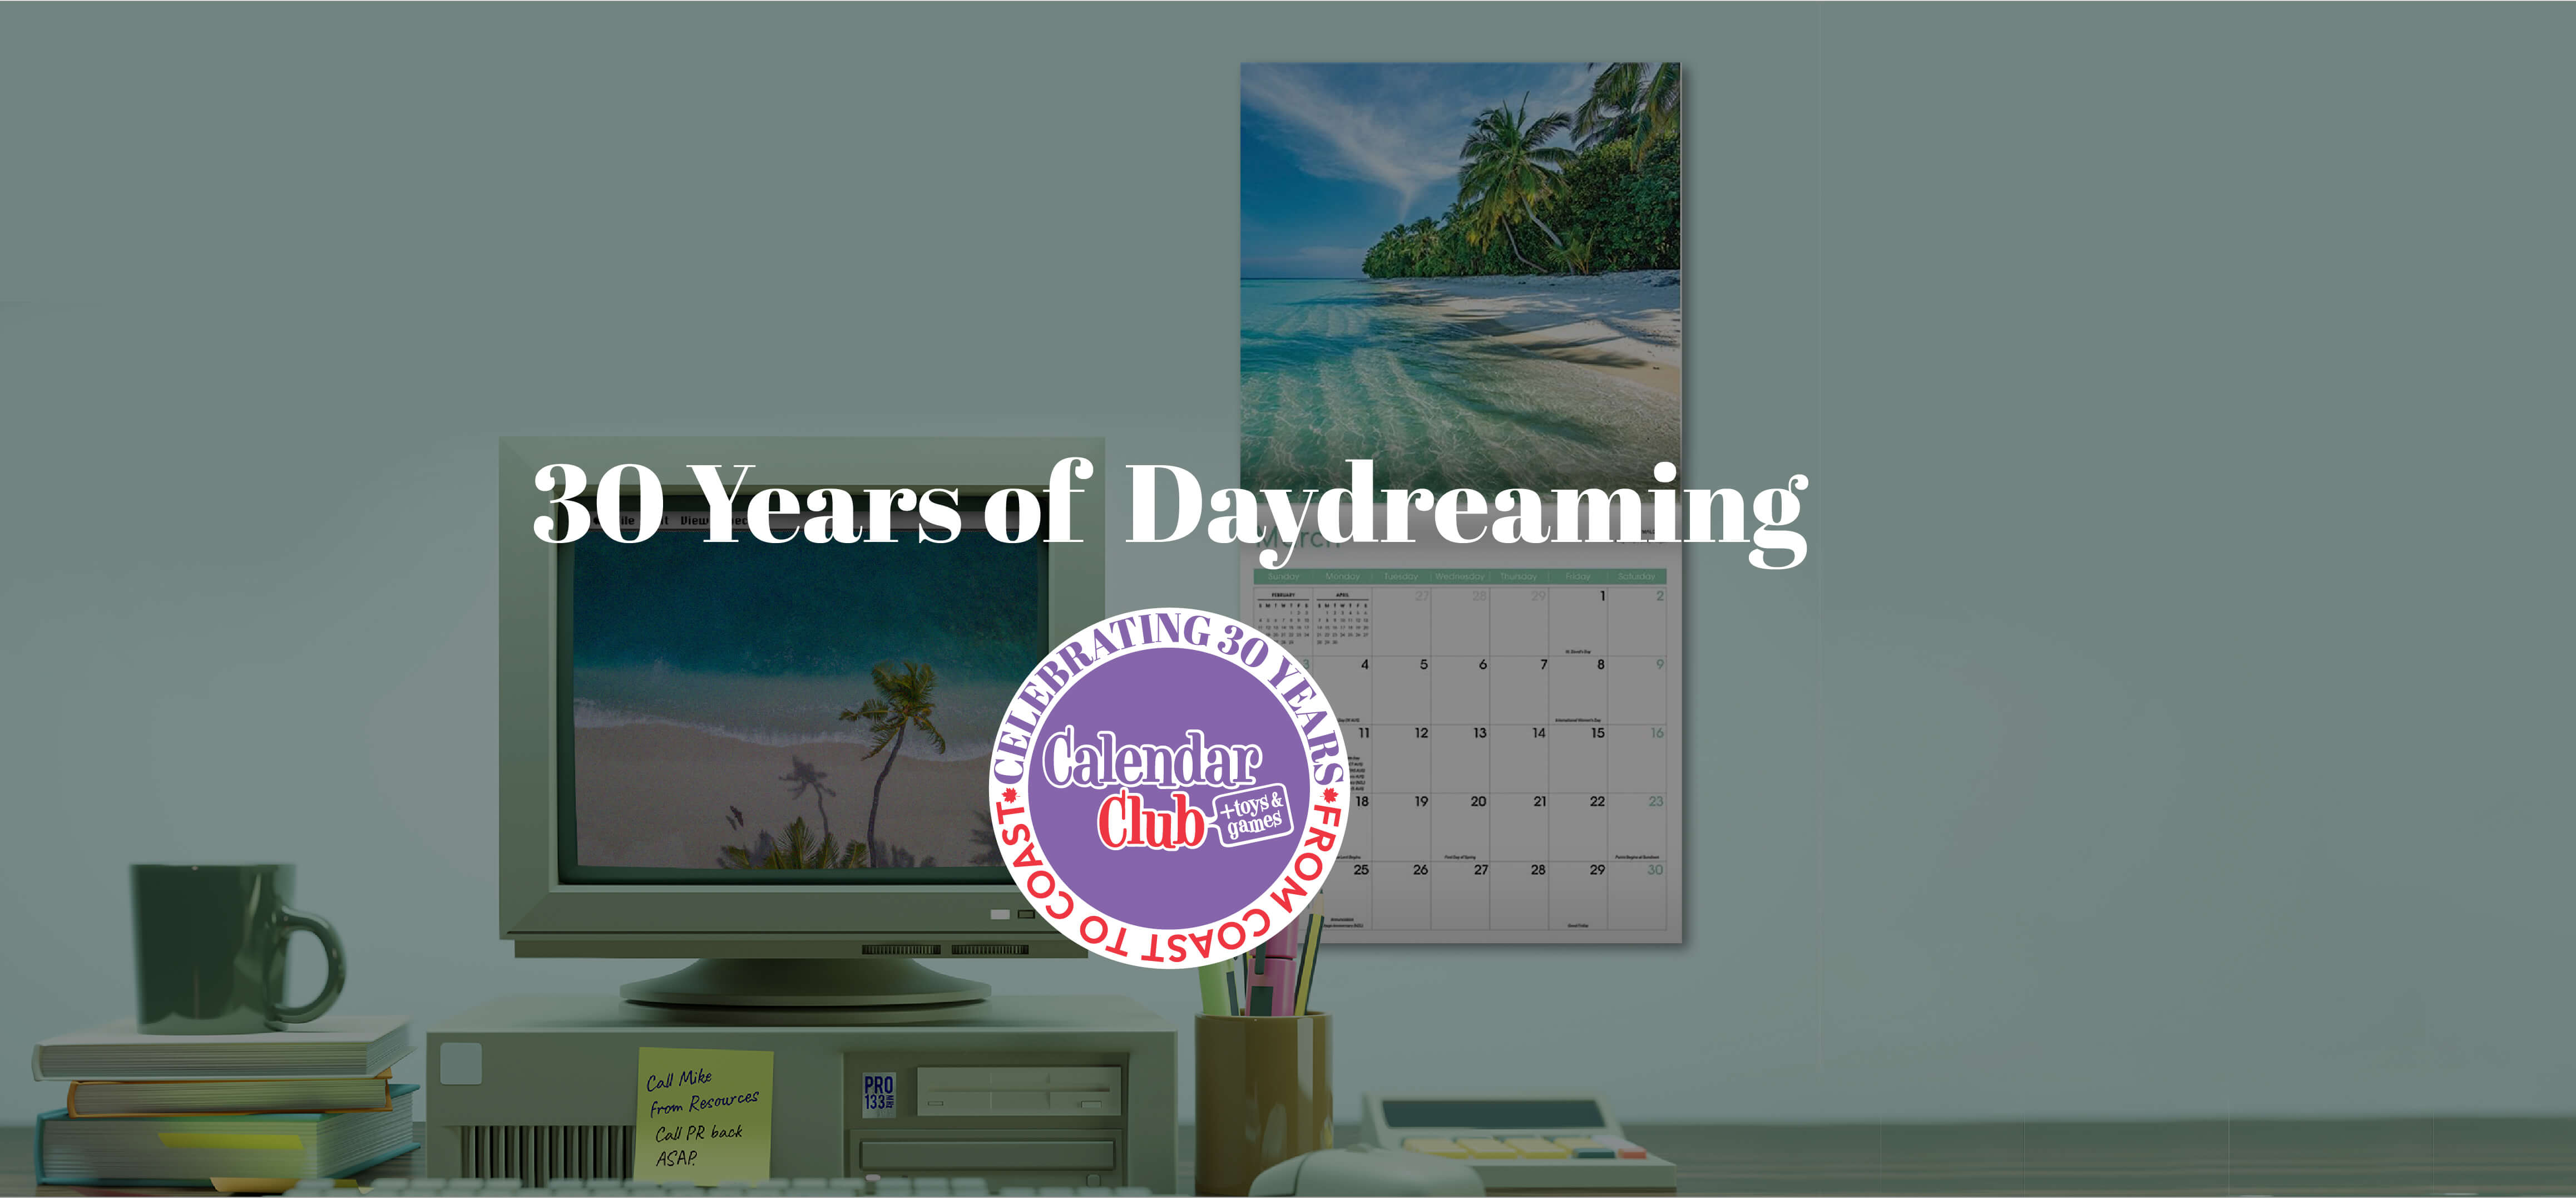 30 Years of Daydreaming